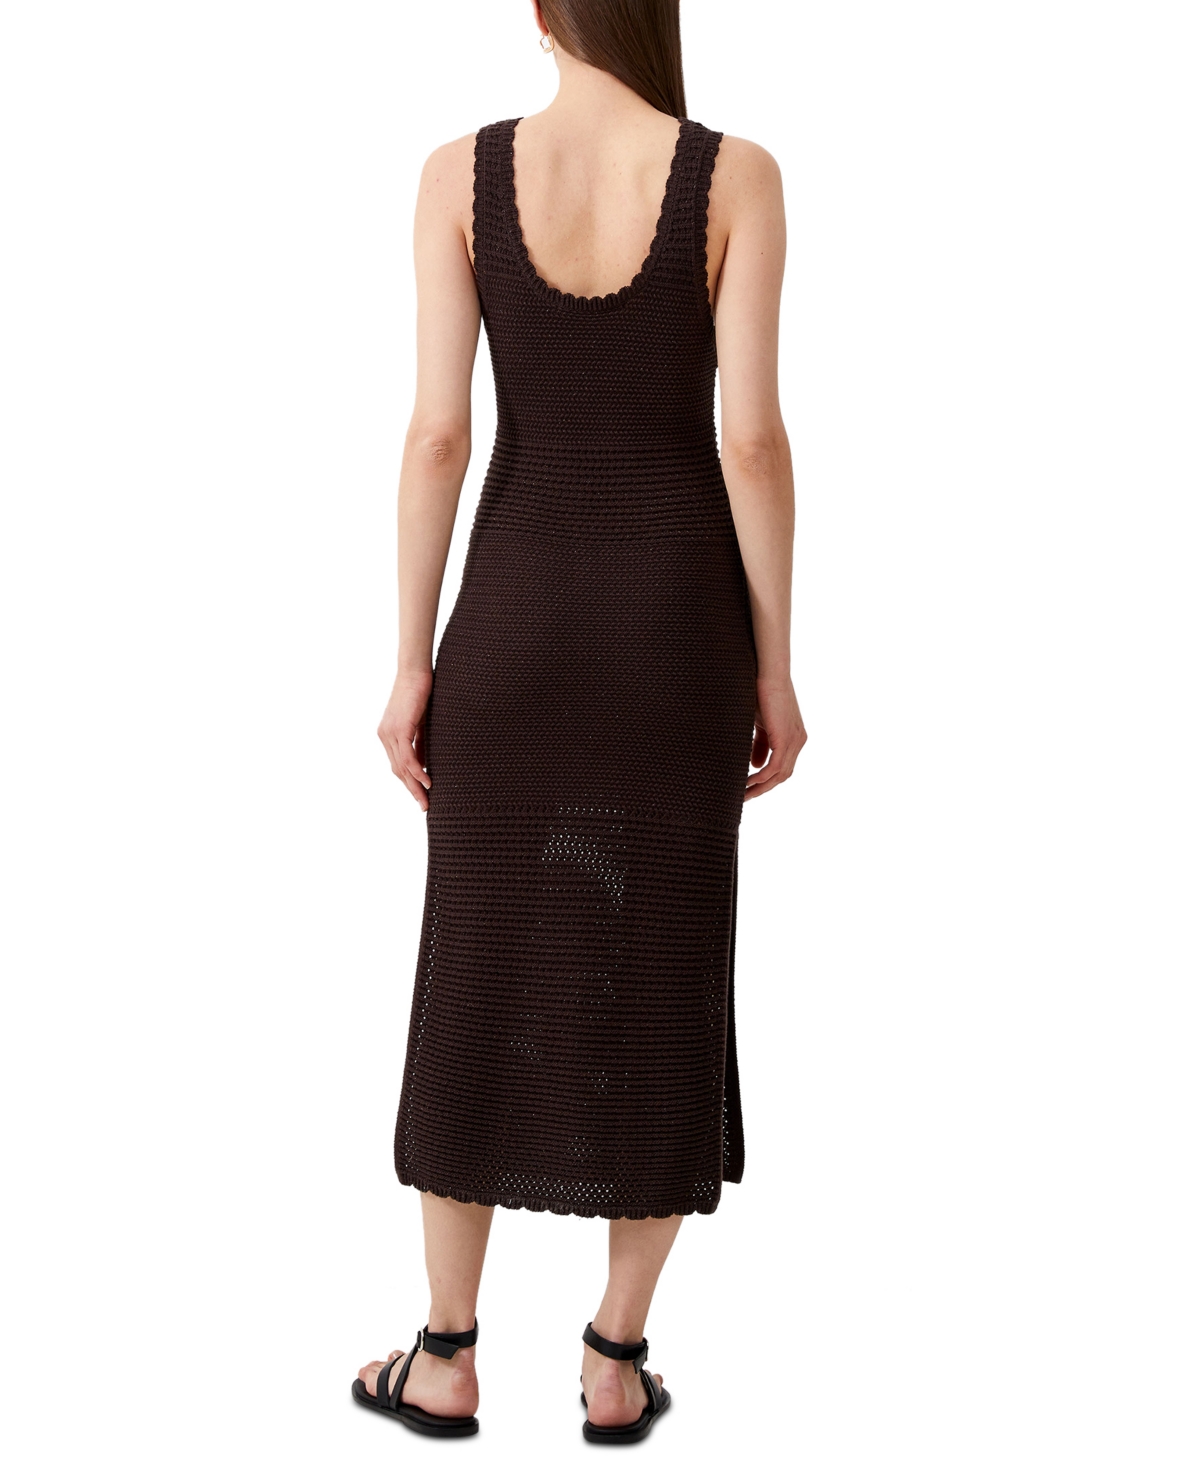 Shop French Connection Women's Cotton Crochet Sleeveless Midi Dress In Chocolate Torte